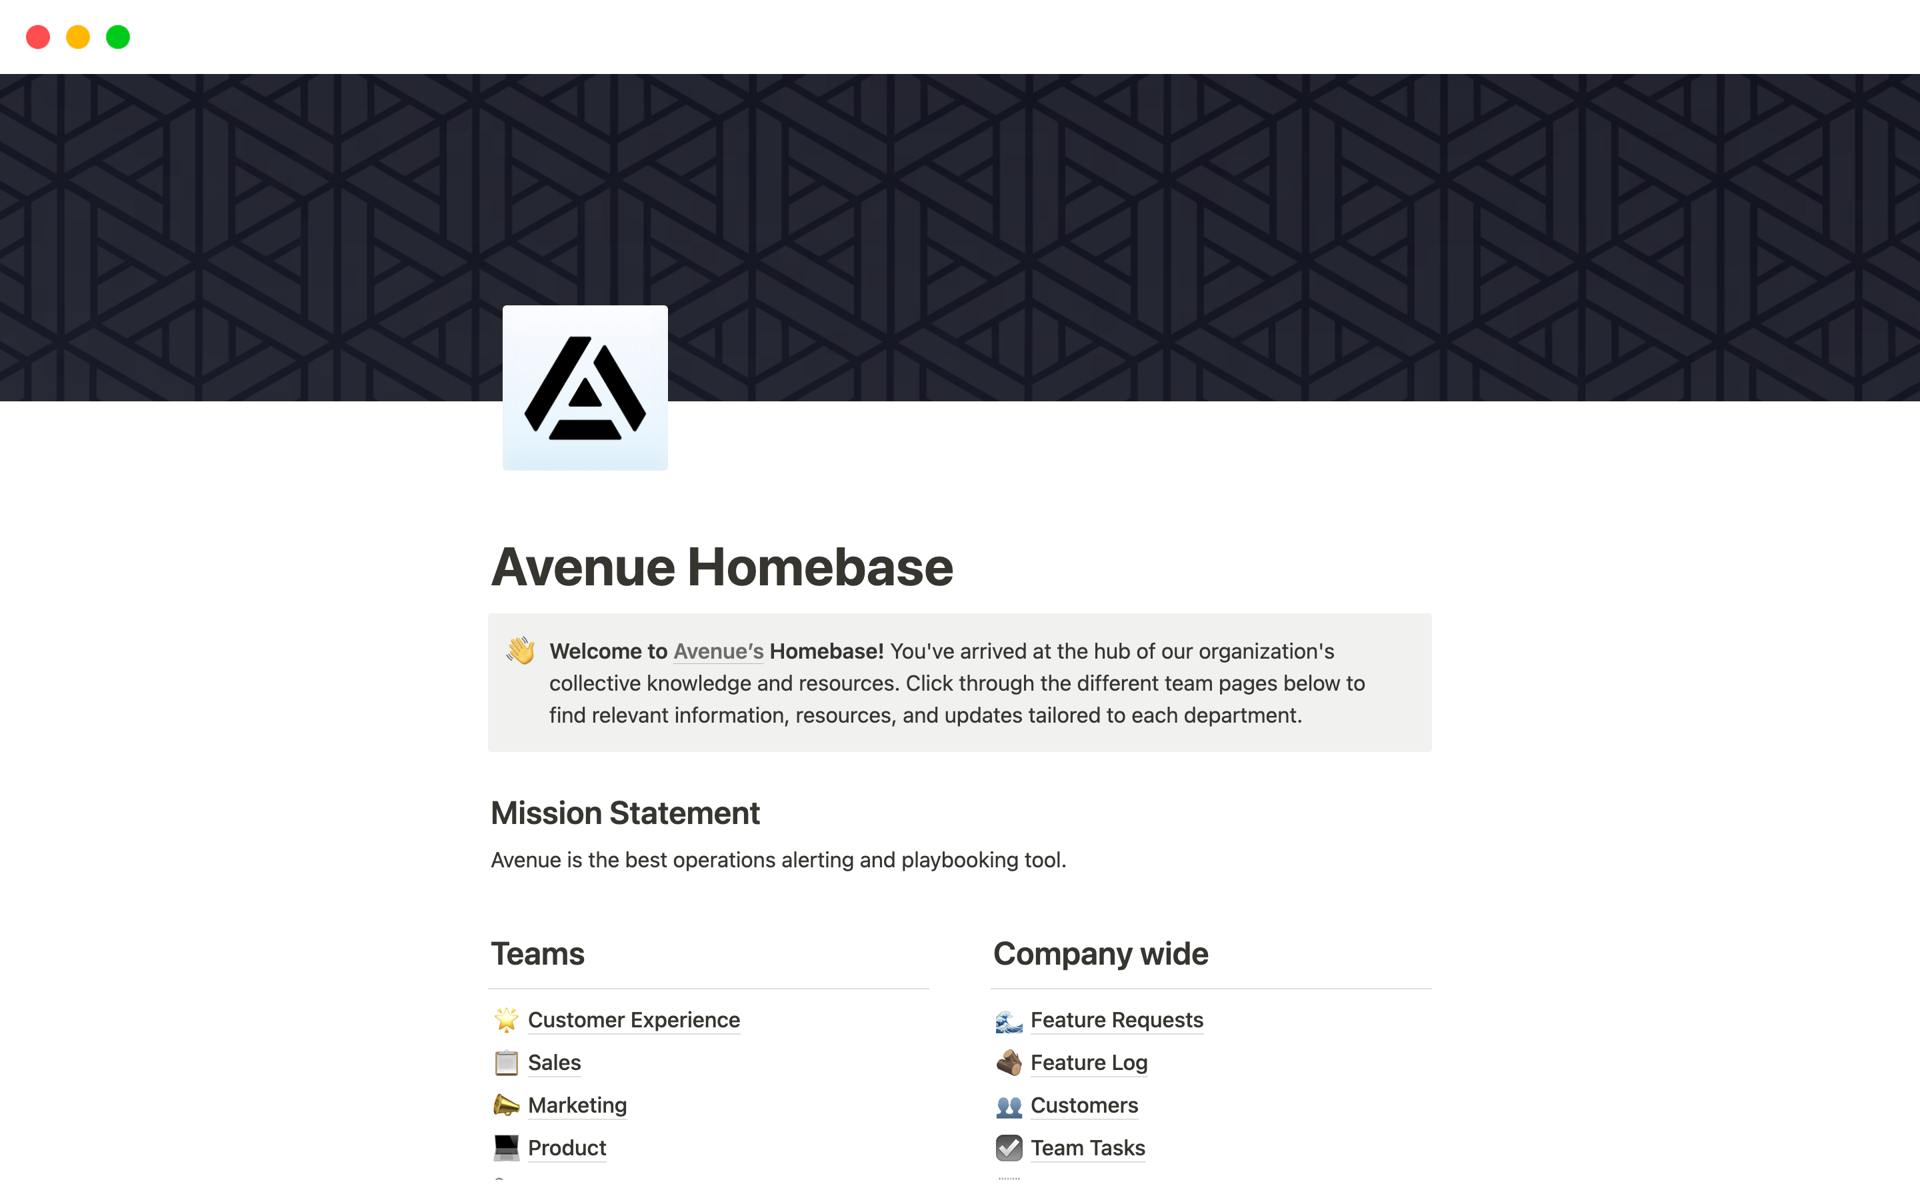 Avenue uses Notion as the company-wide source of truth for all team activities, cross-team collaboration, and information sharing—especially for handoffs between customer support and engineering.